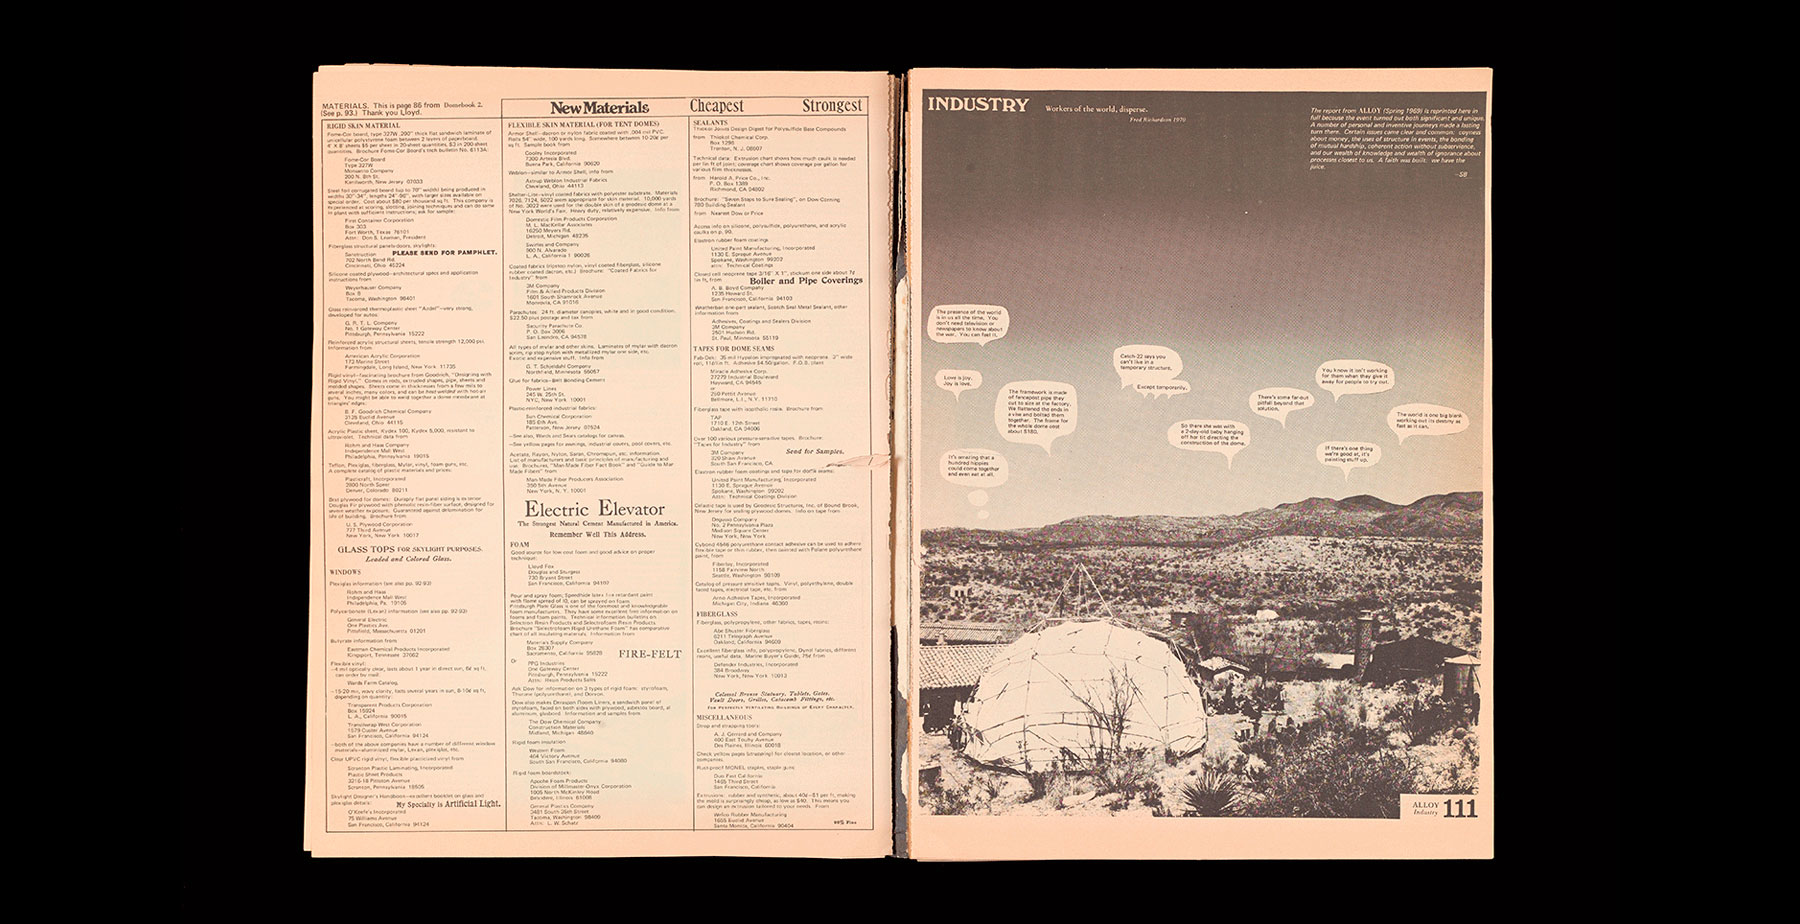 The last Whole Earth Catalog access to- tools Stewart Brand 1971